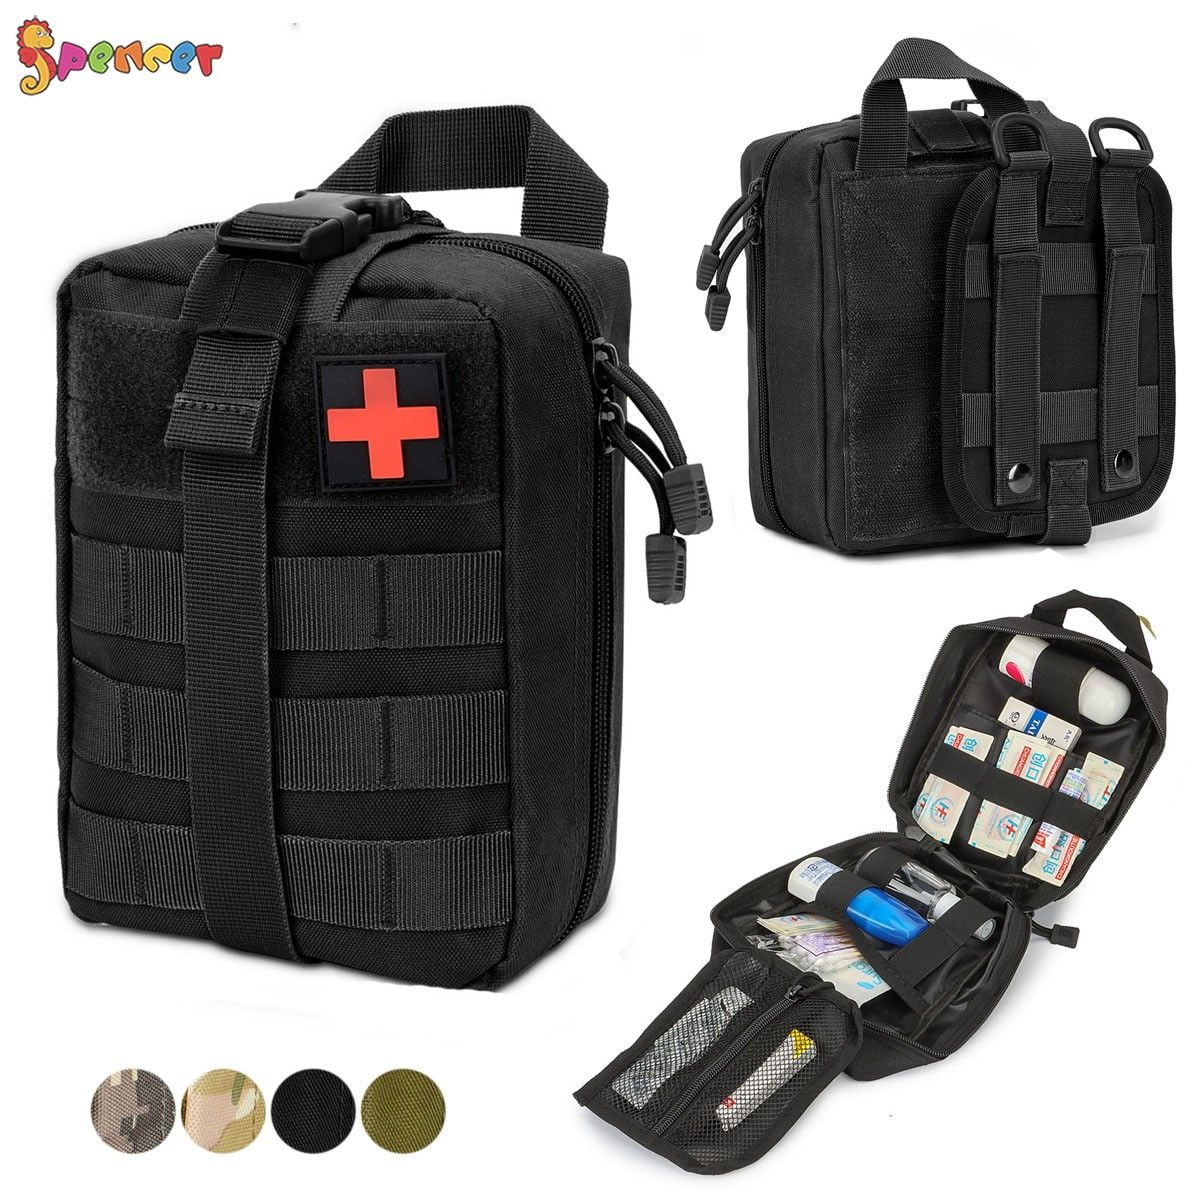 EMT Pouch Molle Military Medical Utility Bag First Aid Kit Survival Medic Bag 